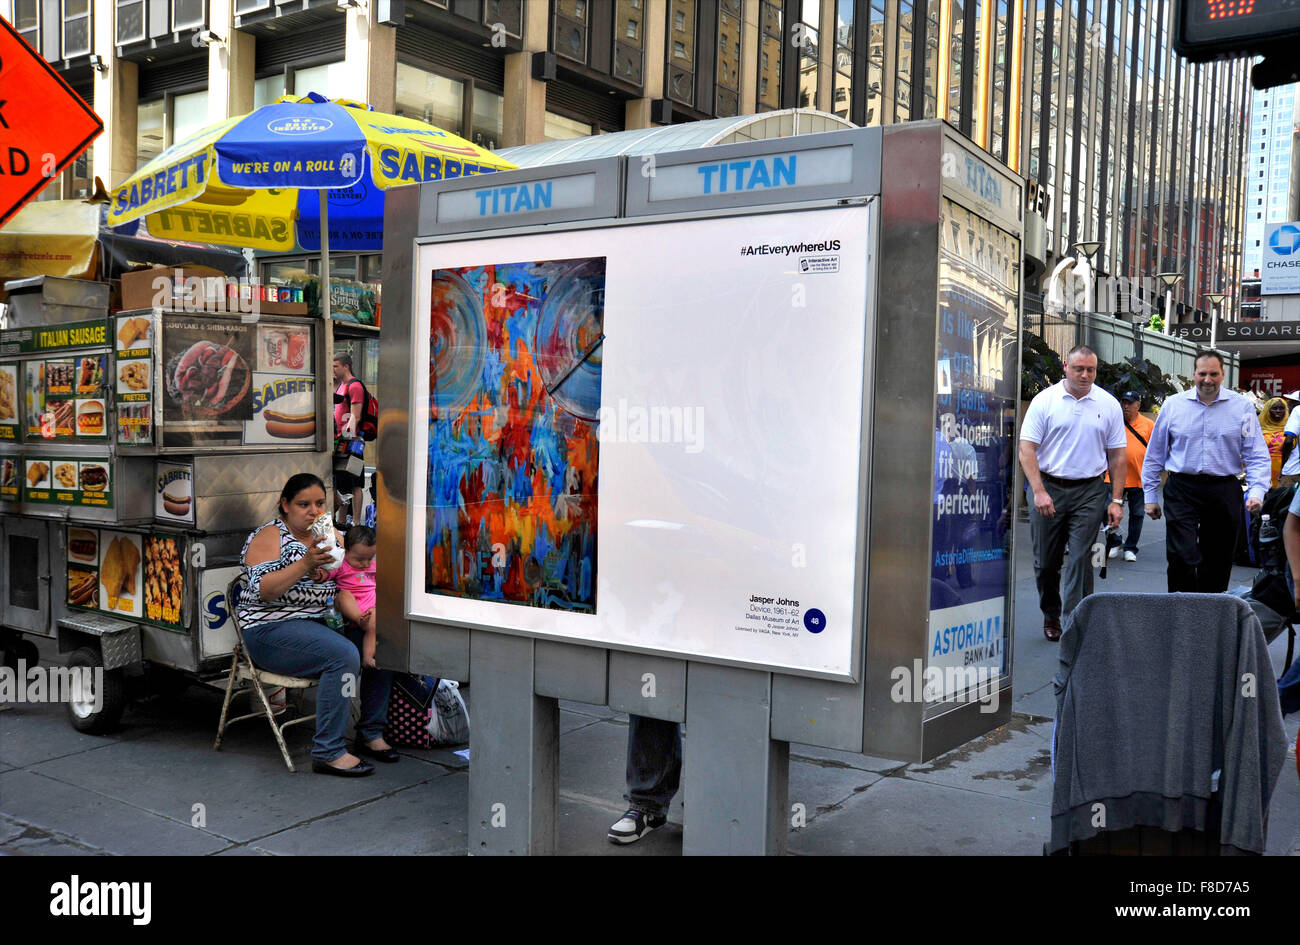 Jasper Johns painting is reproduced on outdoor advertising panel in New York City during the Art Everywhere event. Stock Photo